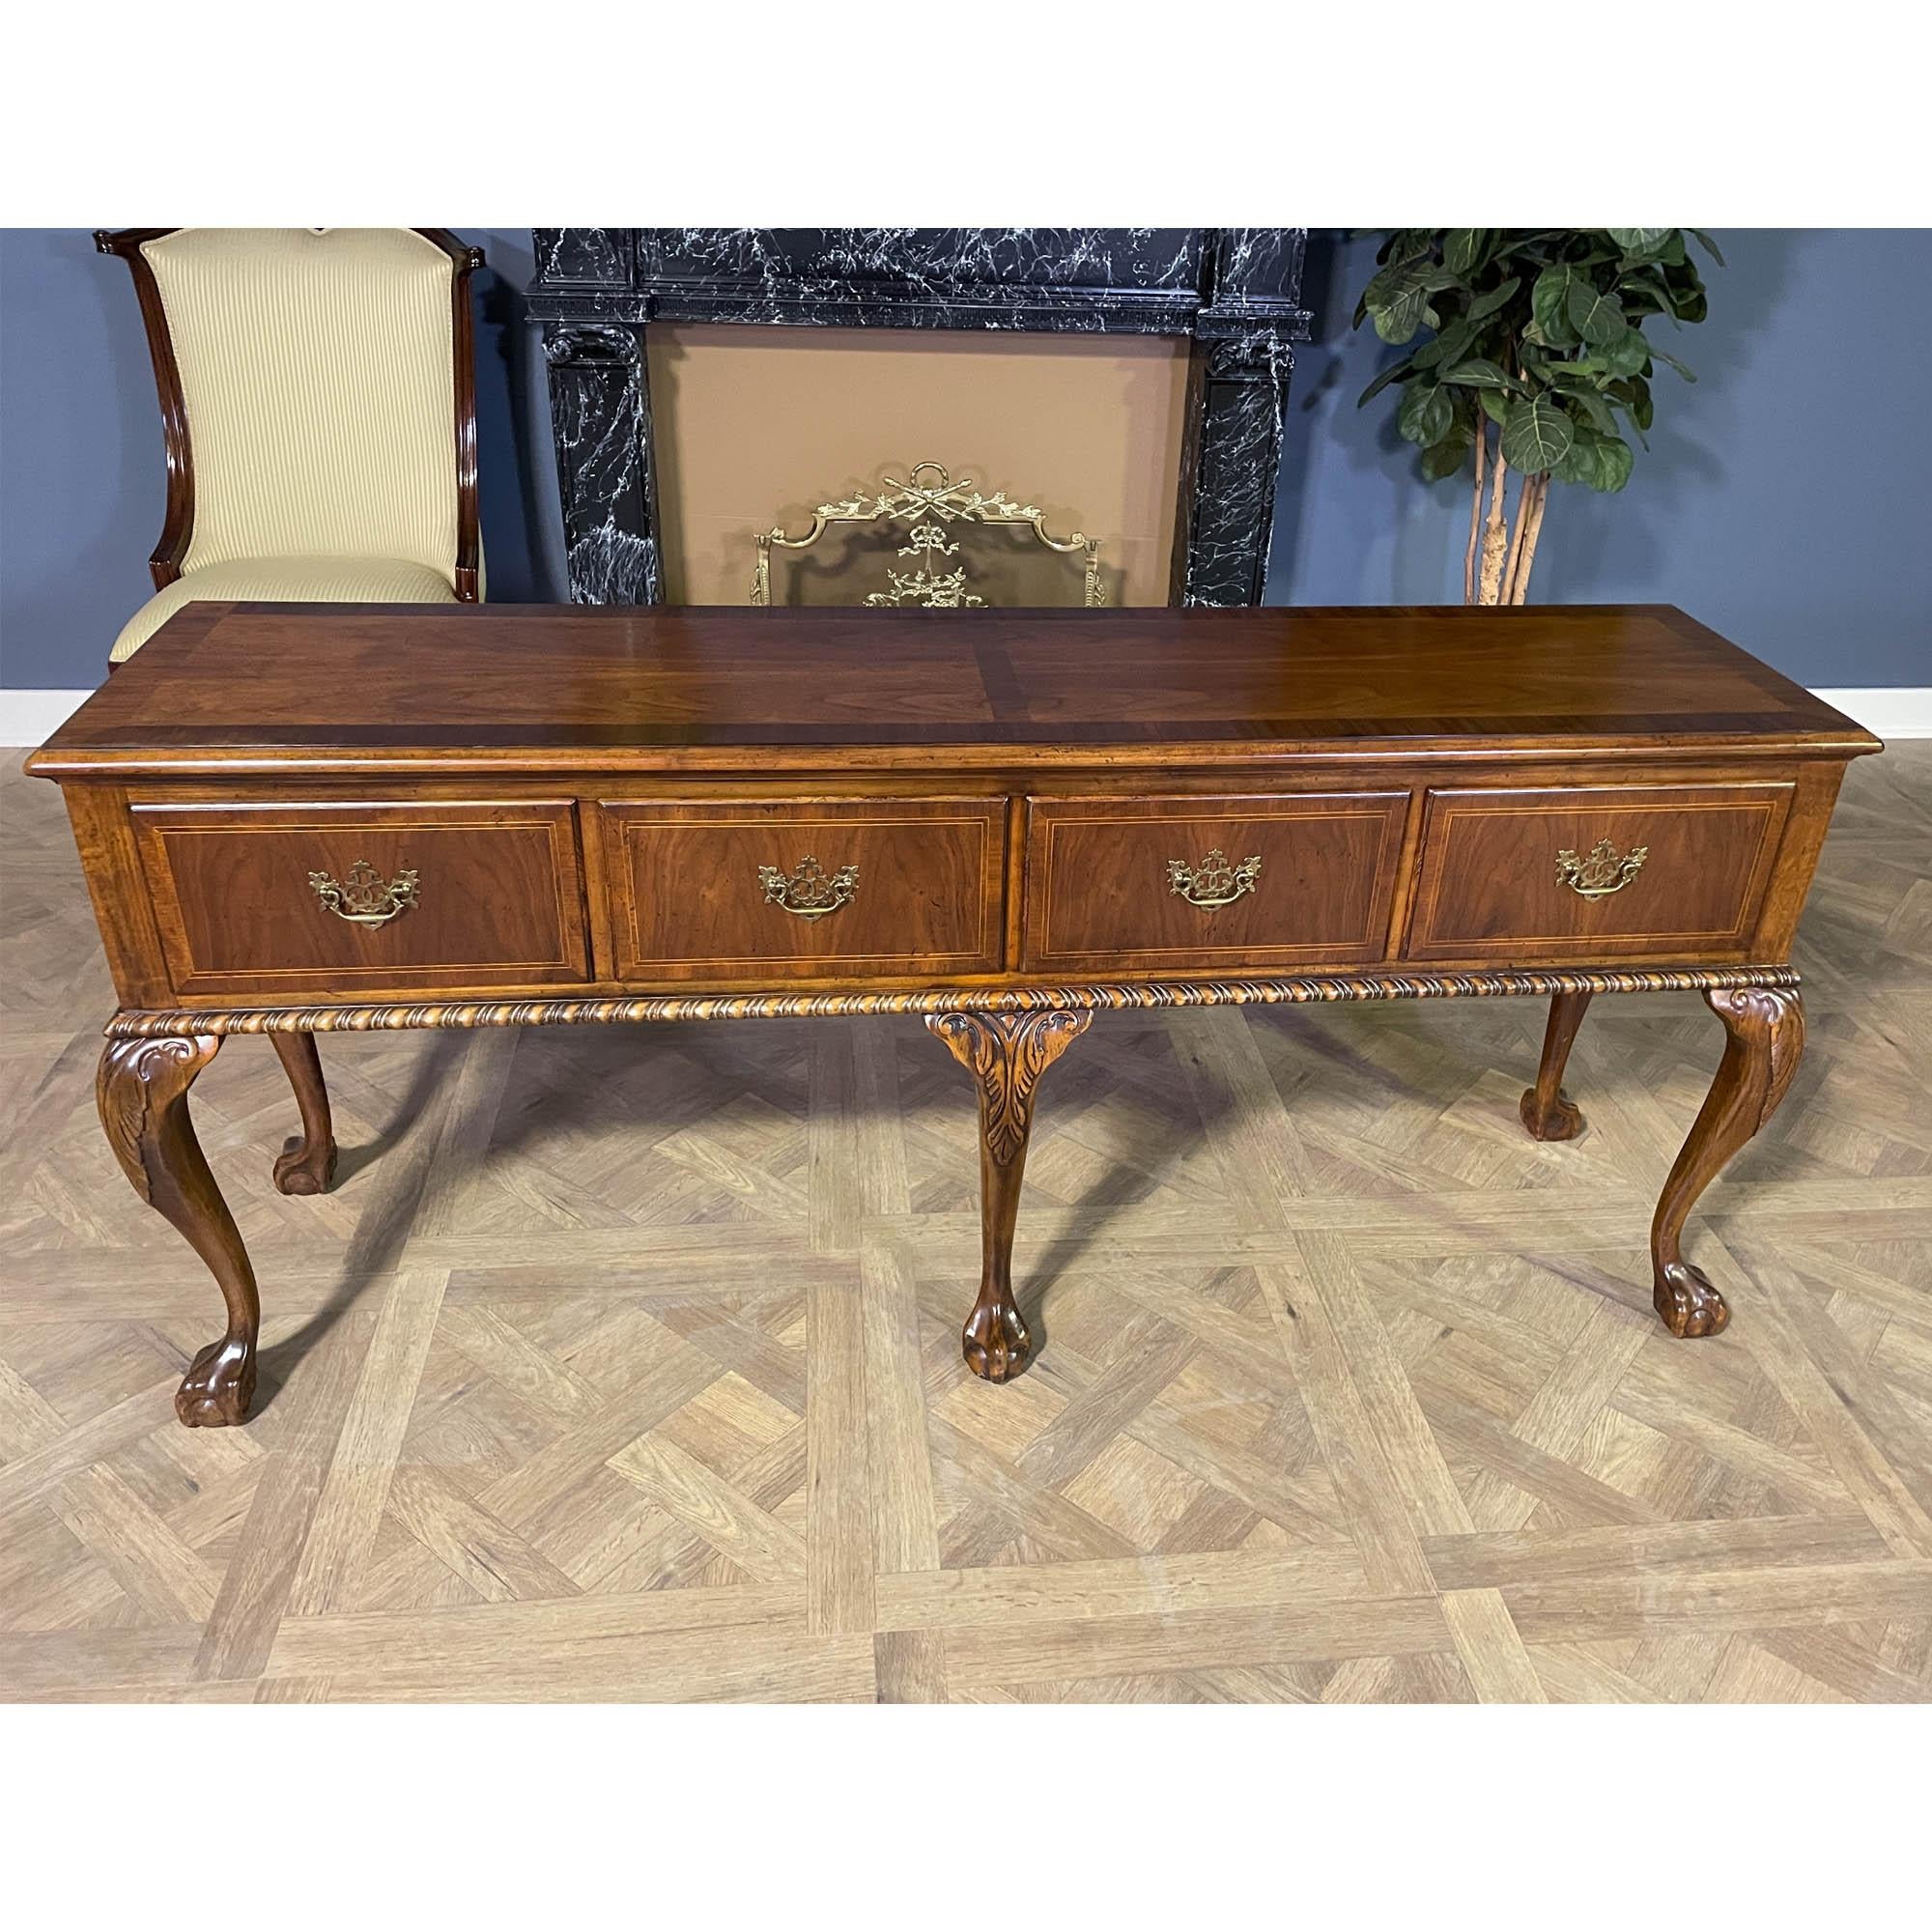 A Vintage Baker Sideboard brought to you by Niagara Furniture. A classic shape this cabinet features four total drawers that make this piece both functional and attractive. The Vintage Baker Sideboard would make a great addition to almost any space